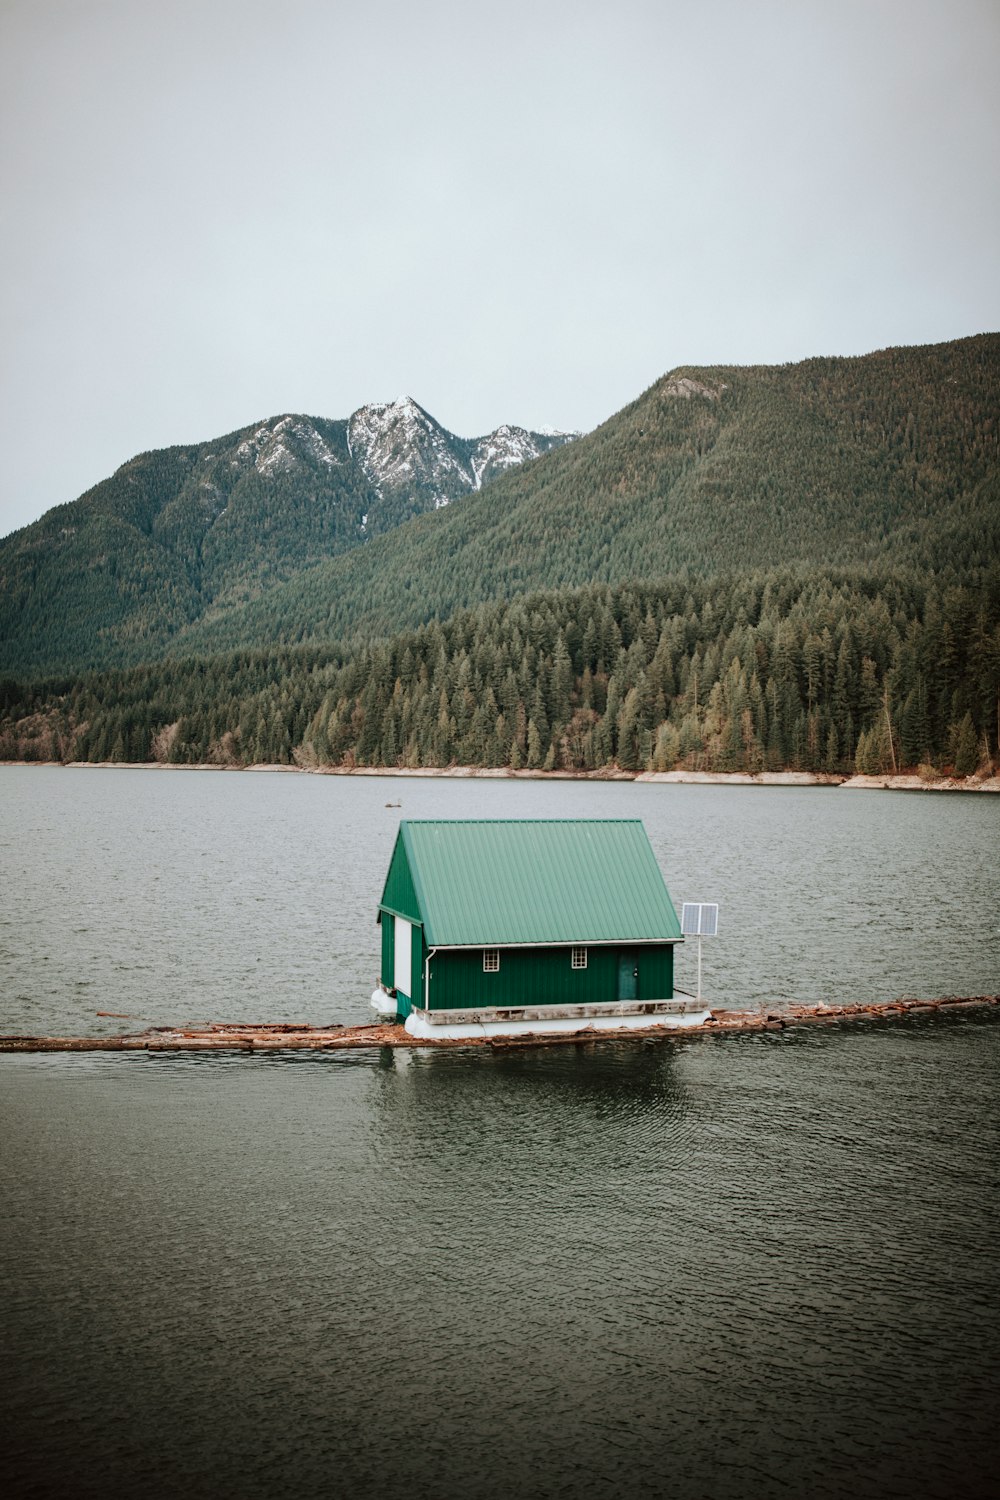 green house in the middle of body of water